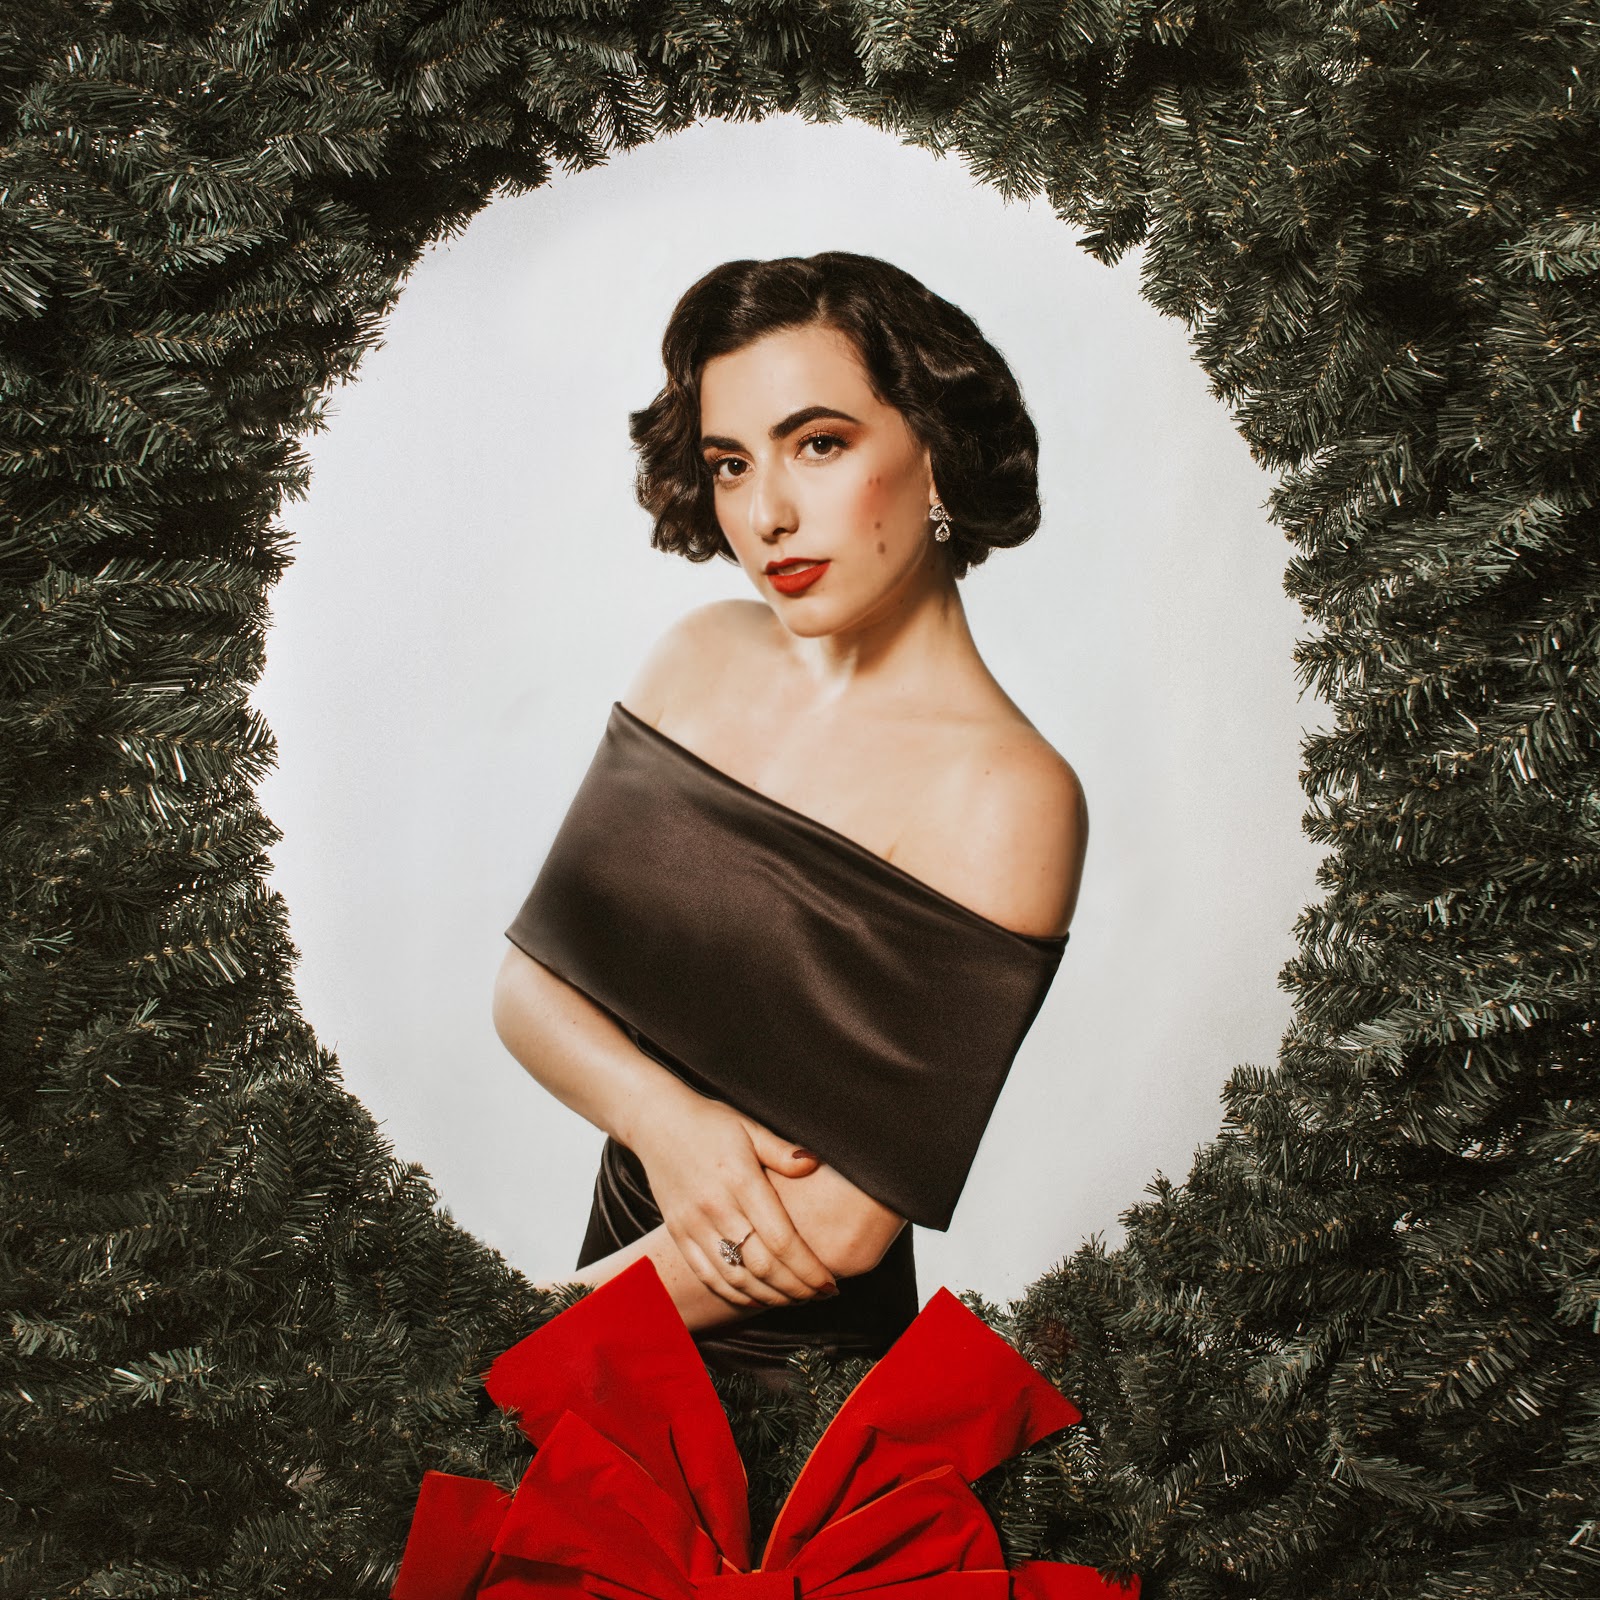 Cassandra Begins 2020 In Style With New Music Video “I Love Christmas”